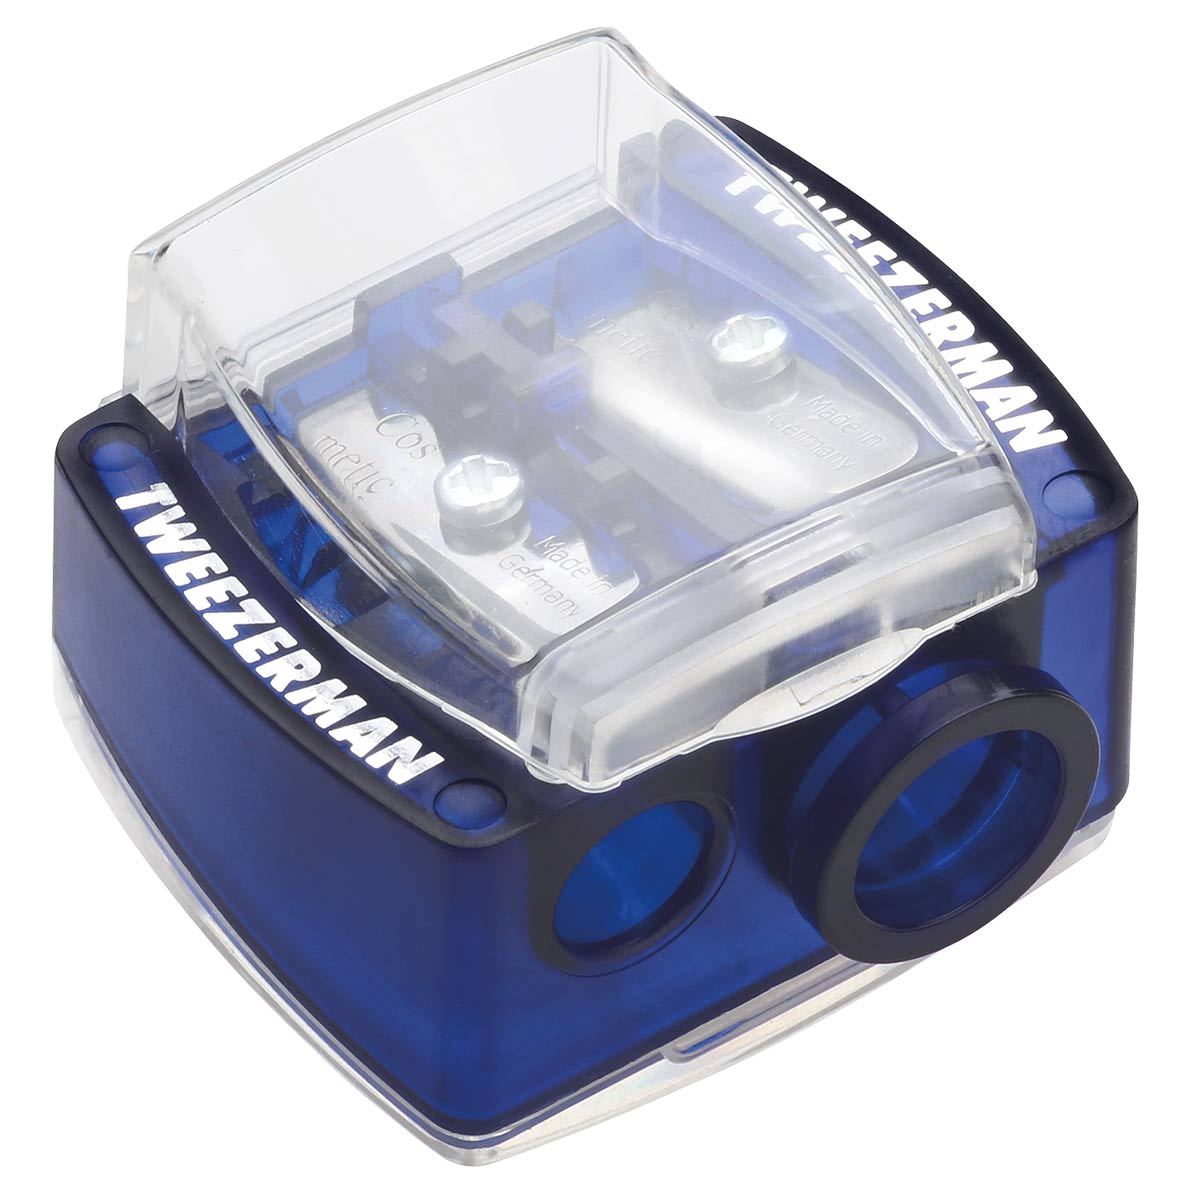 Primary image of Deluxe Cosmetic Pencil Sharpener